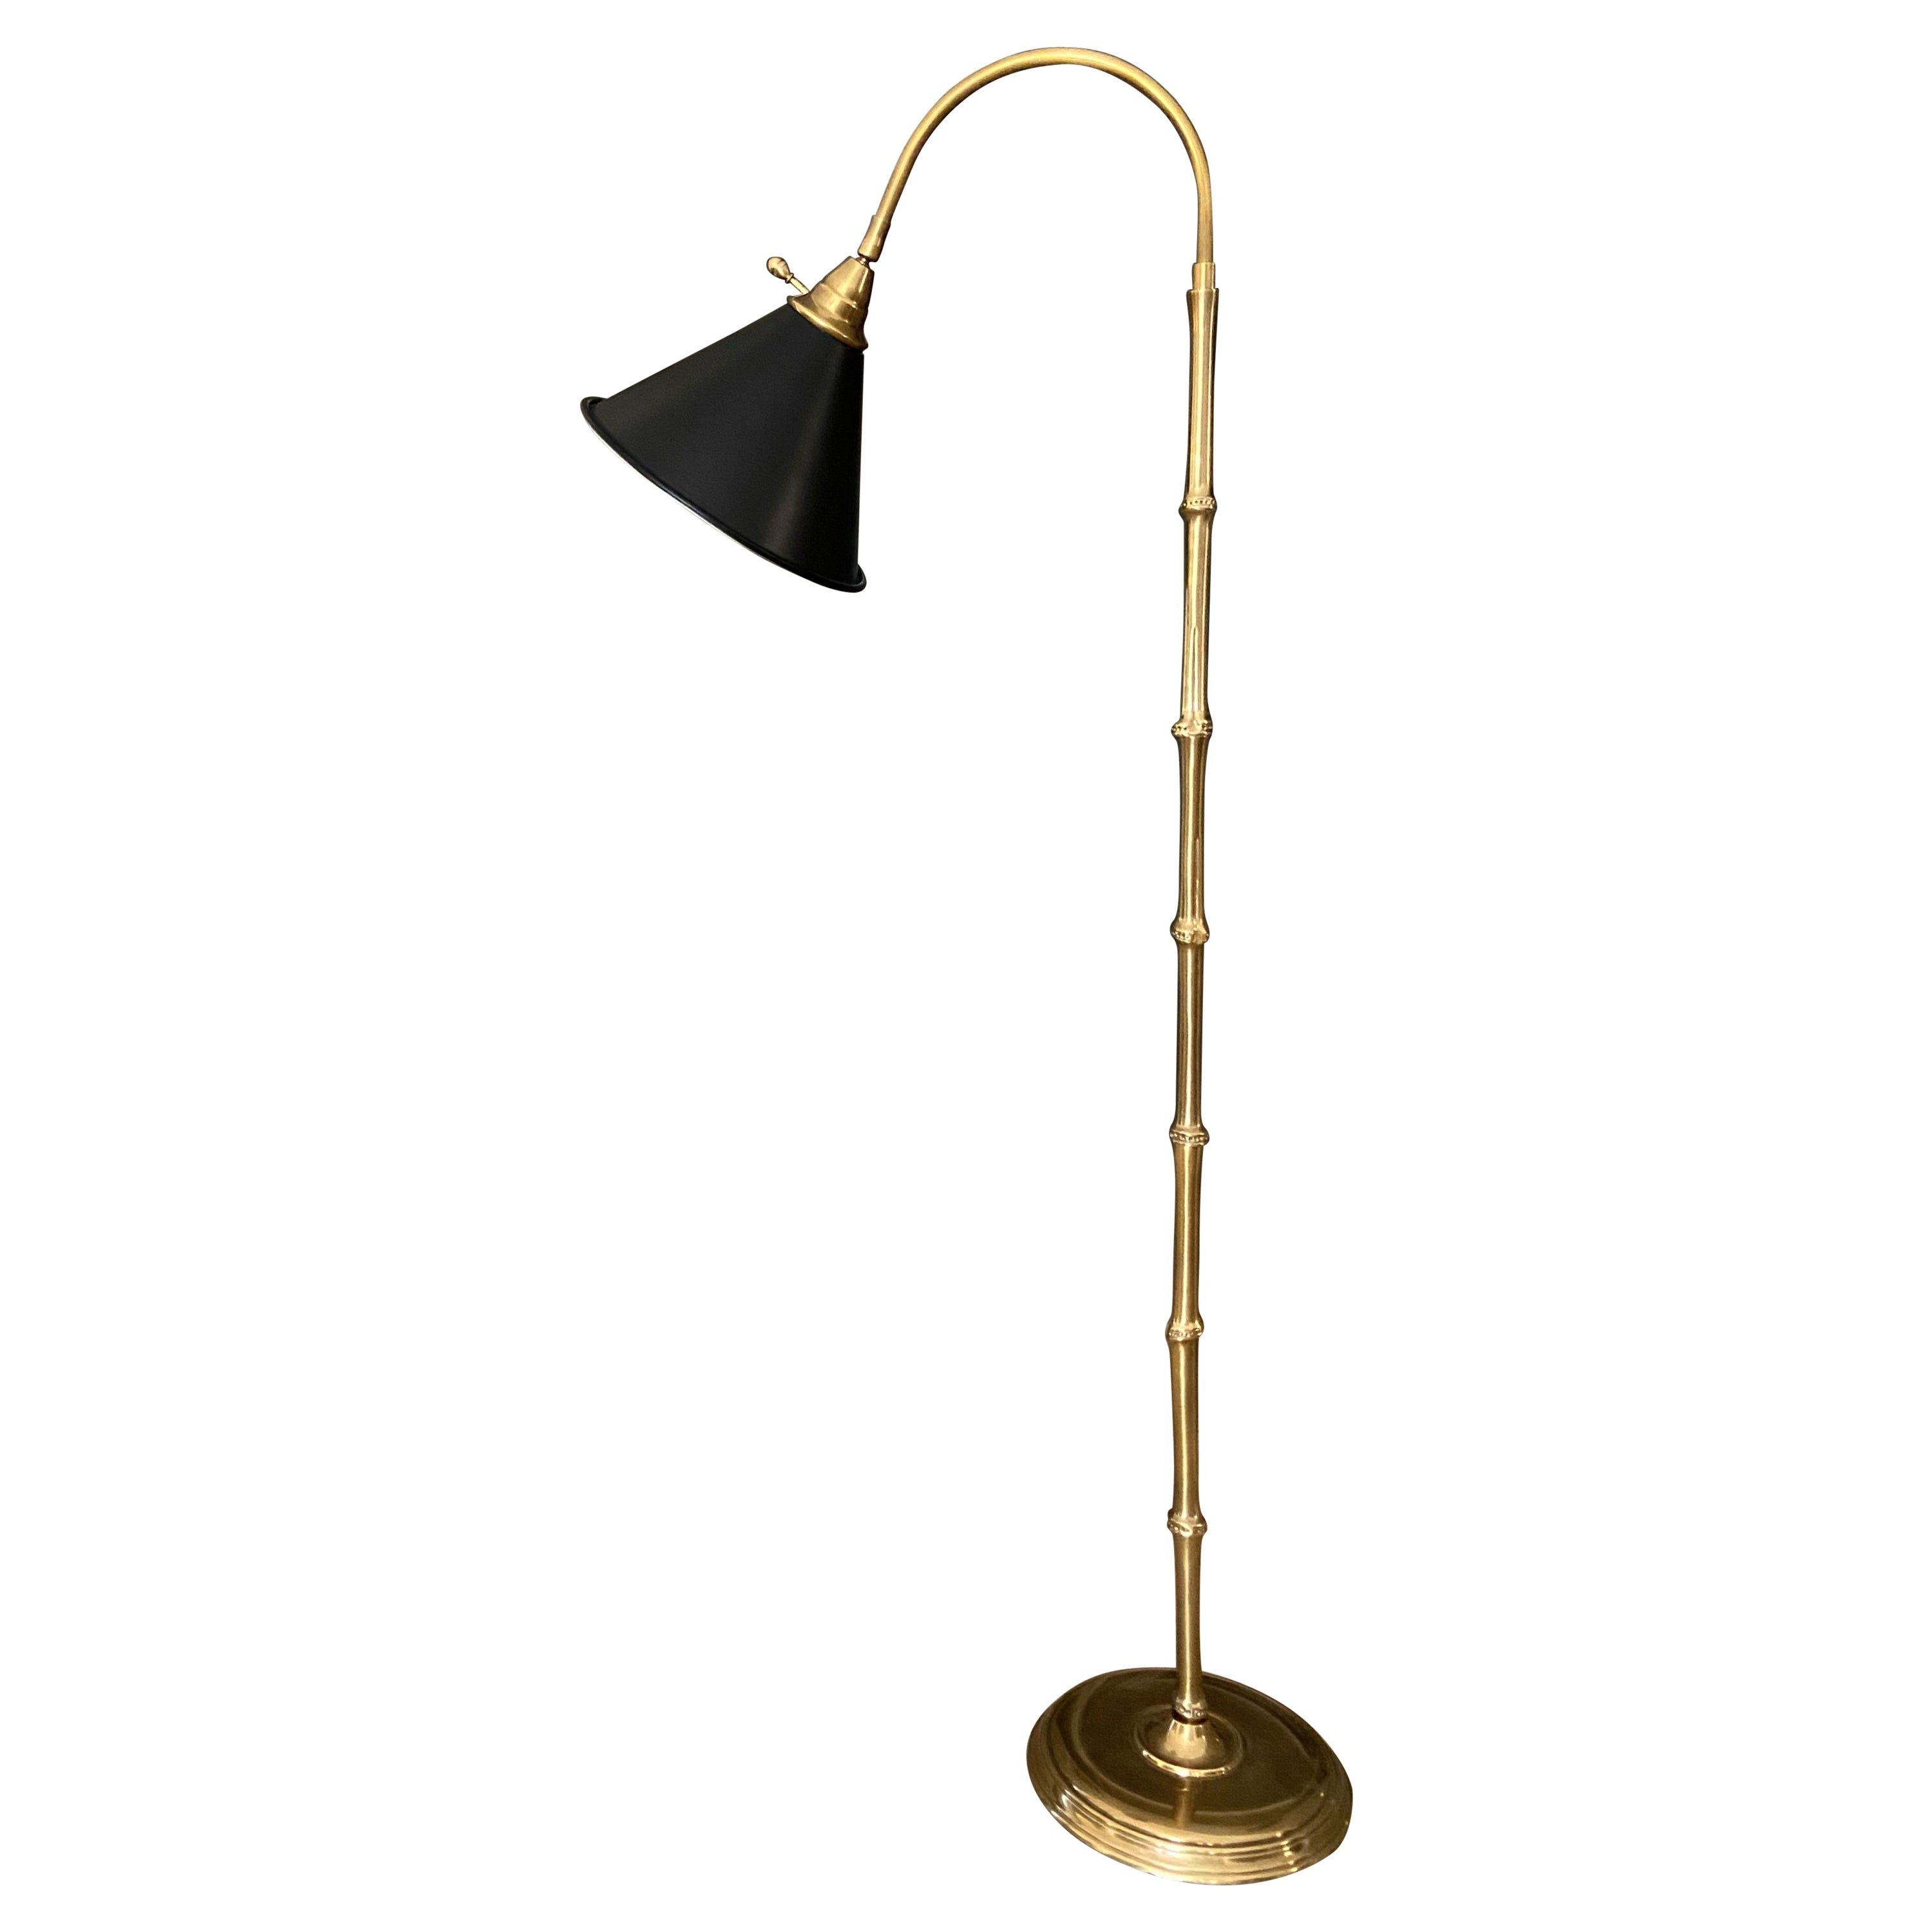 Polished solid brass faux bamboo design floor lamp : On Antique Row - West  Palm Beach - Florida